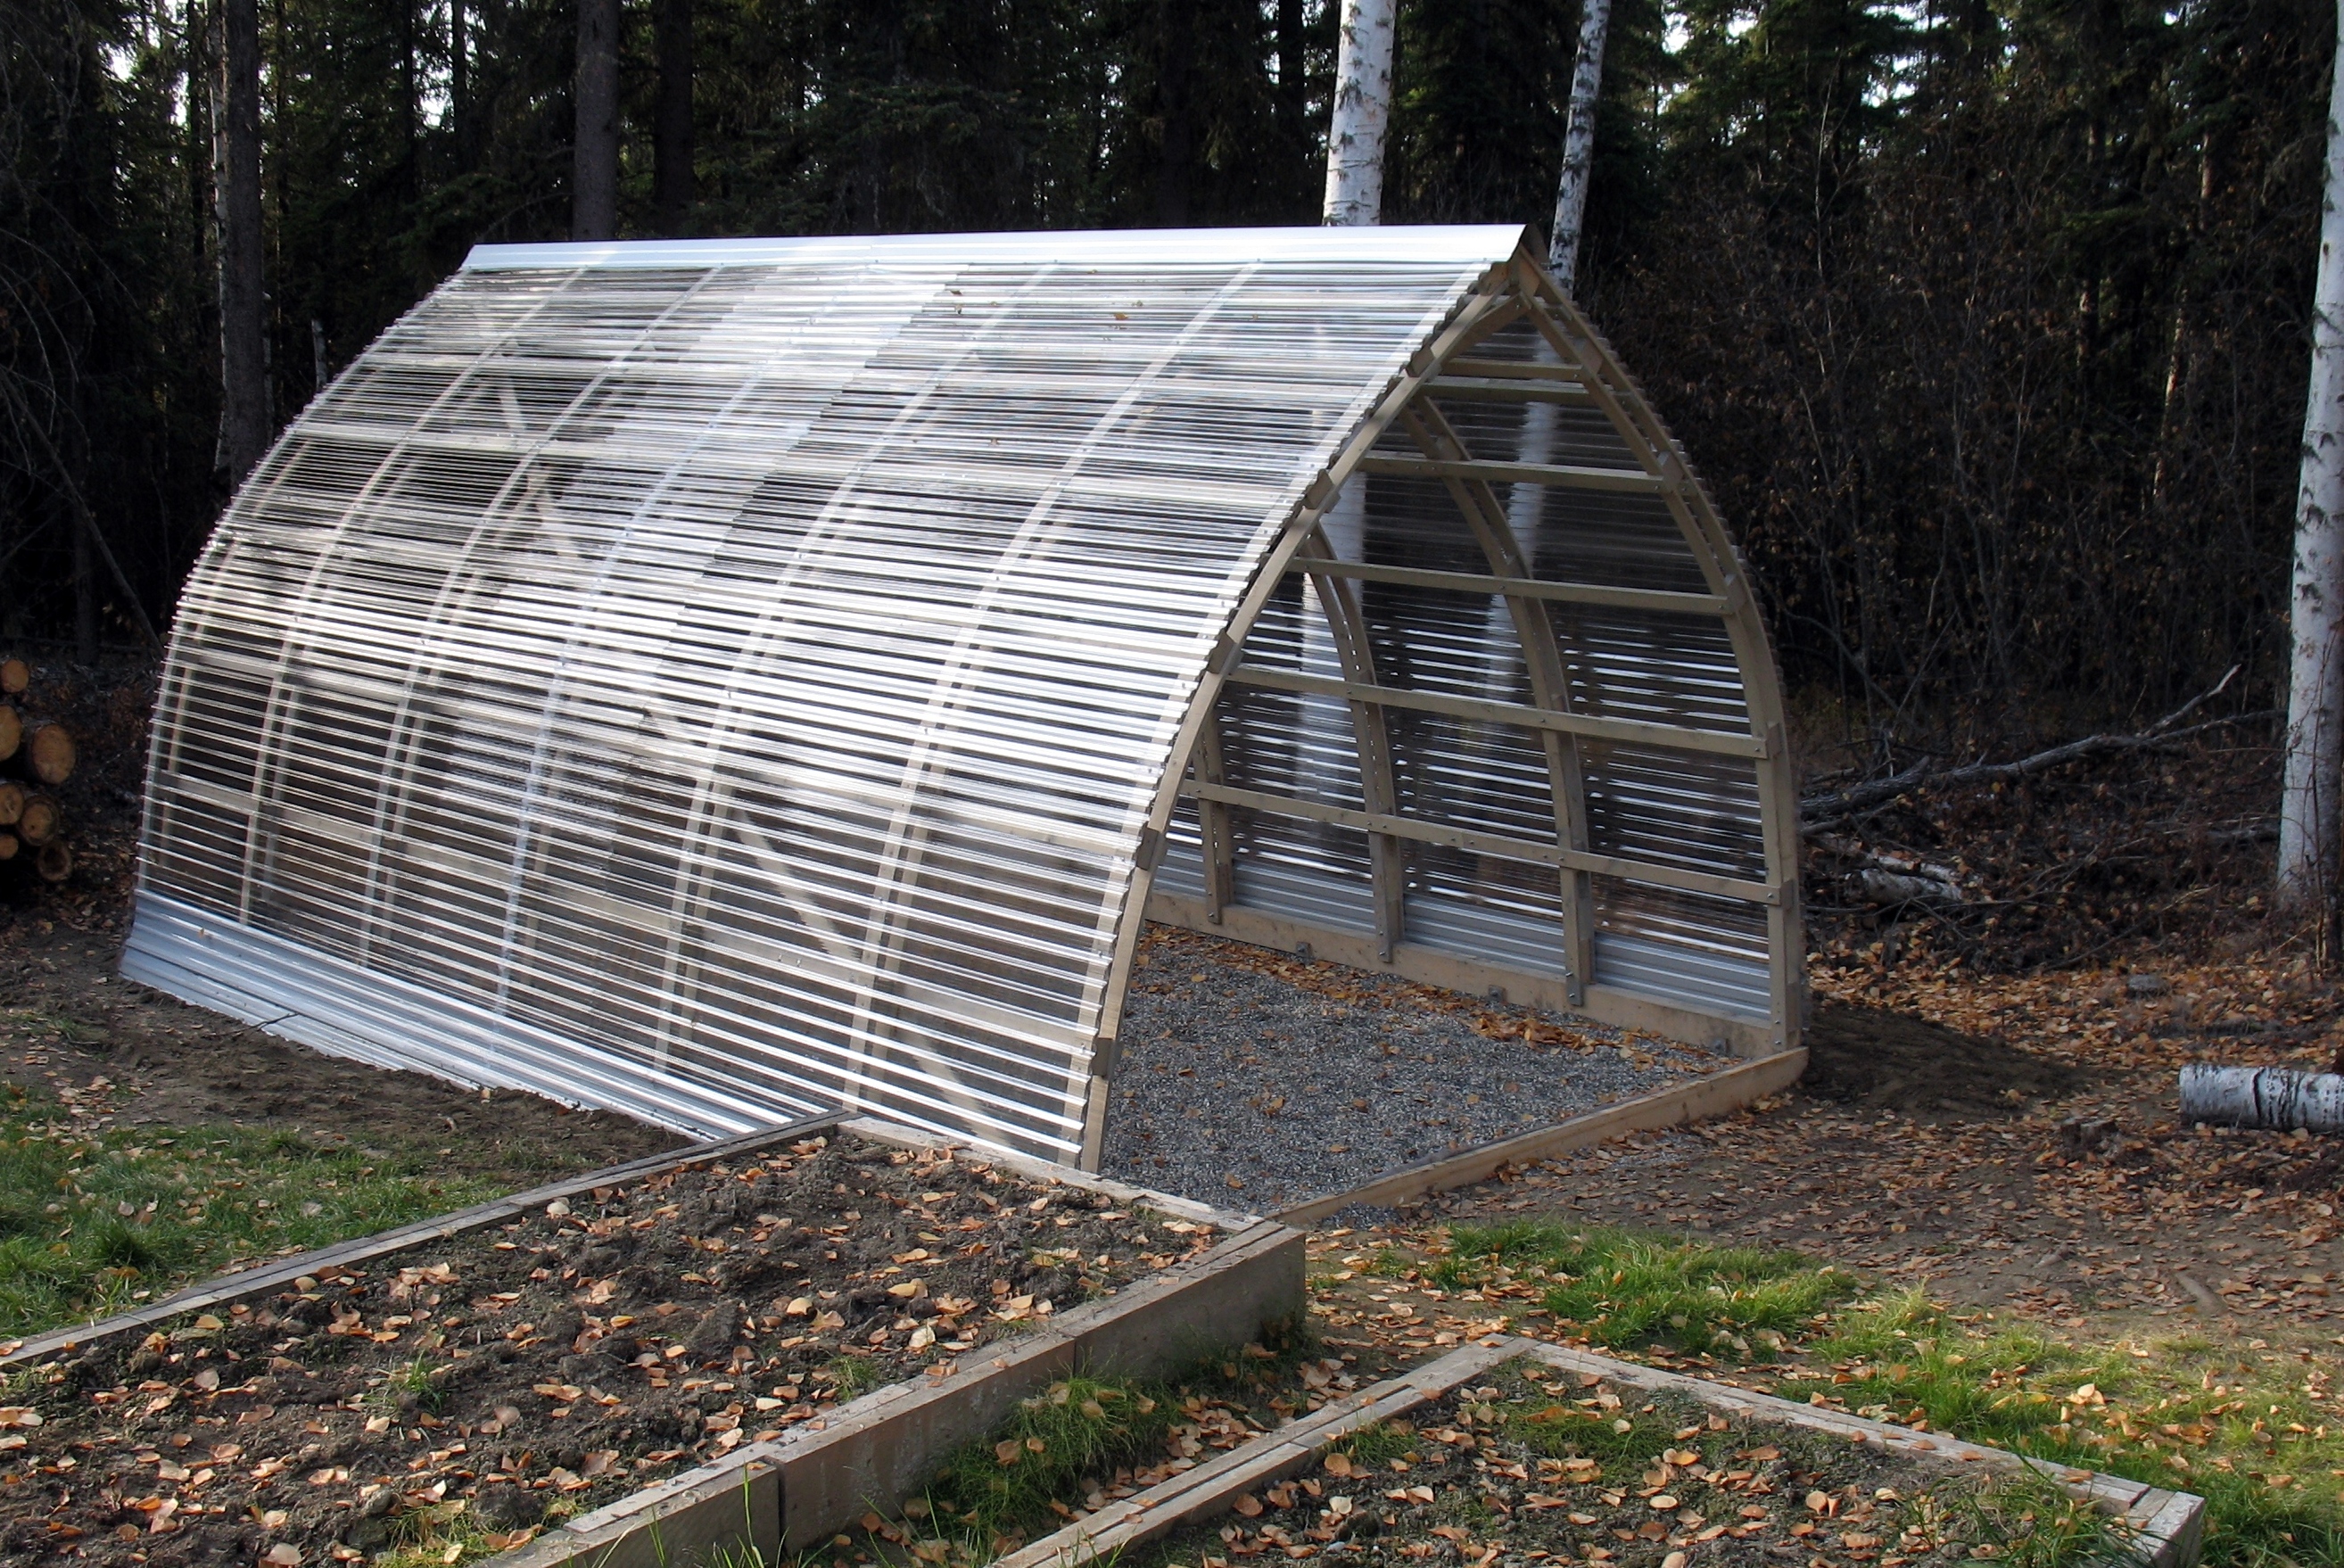 Hoop/quonset hut type building for temporary living structure (natural 